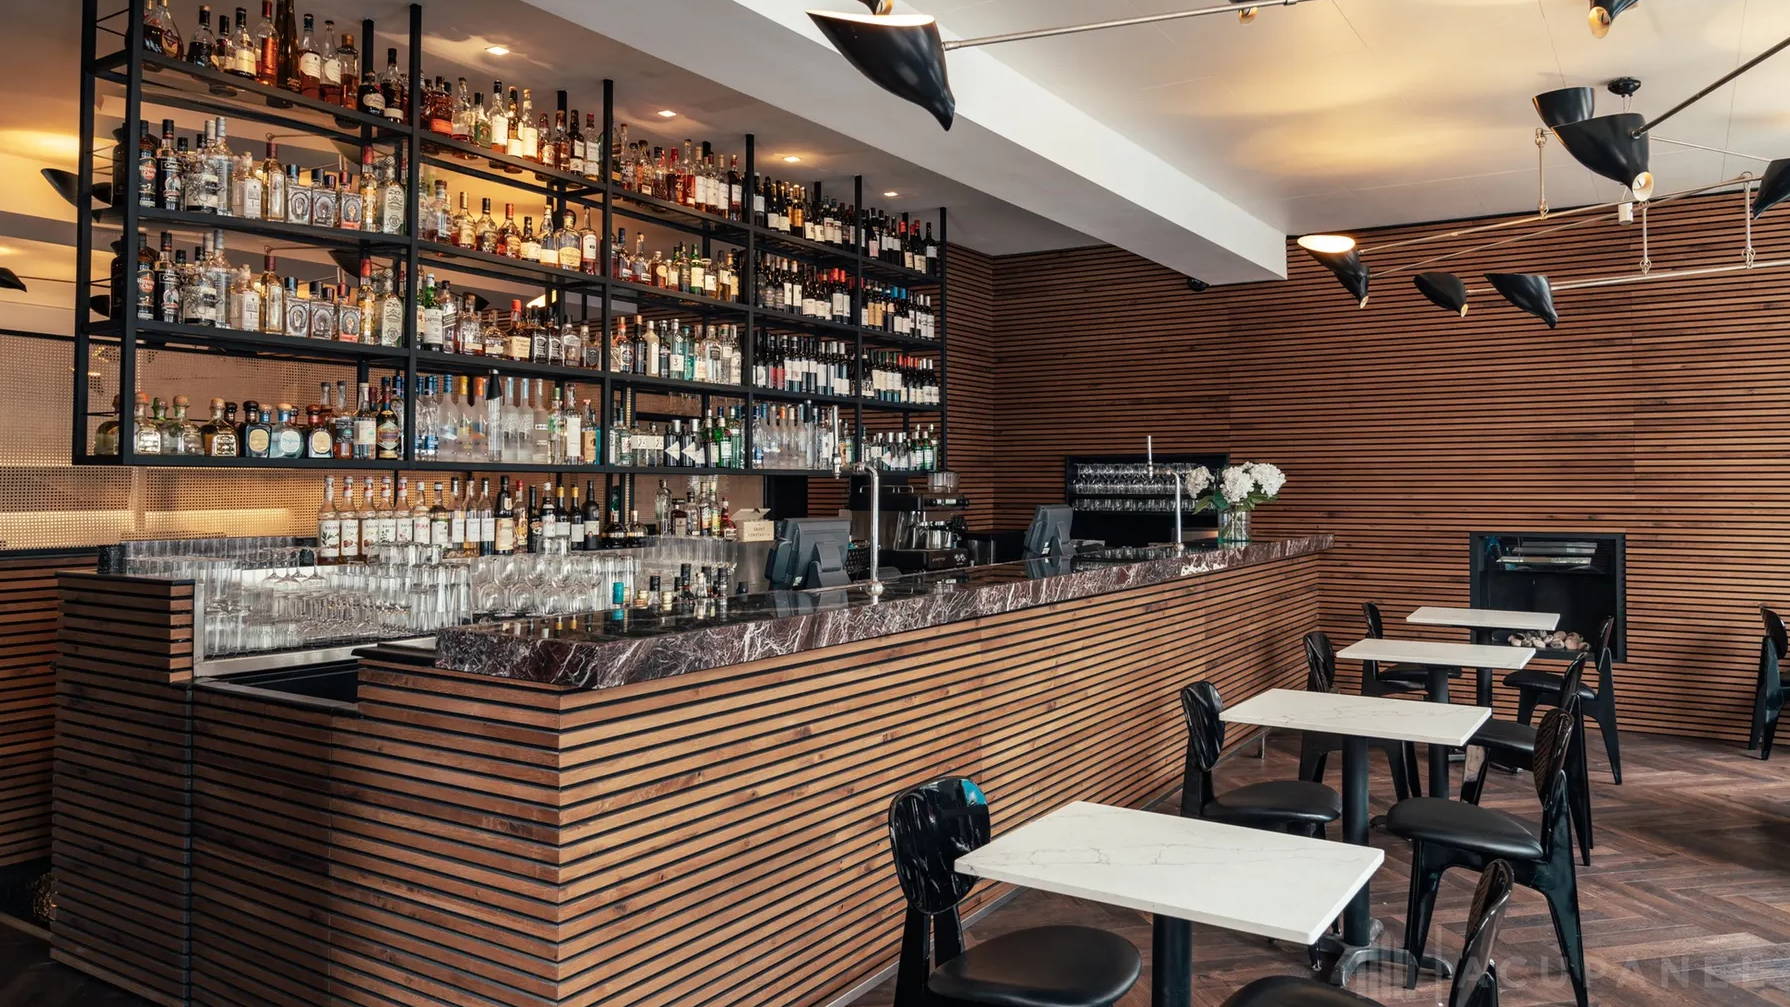 As popular restaurant setting using acoustic wall paneling in oak with an oil applied.